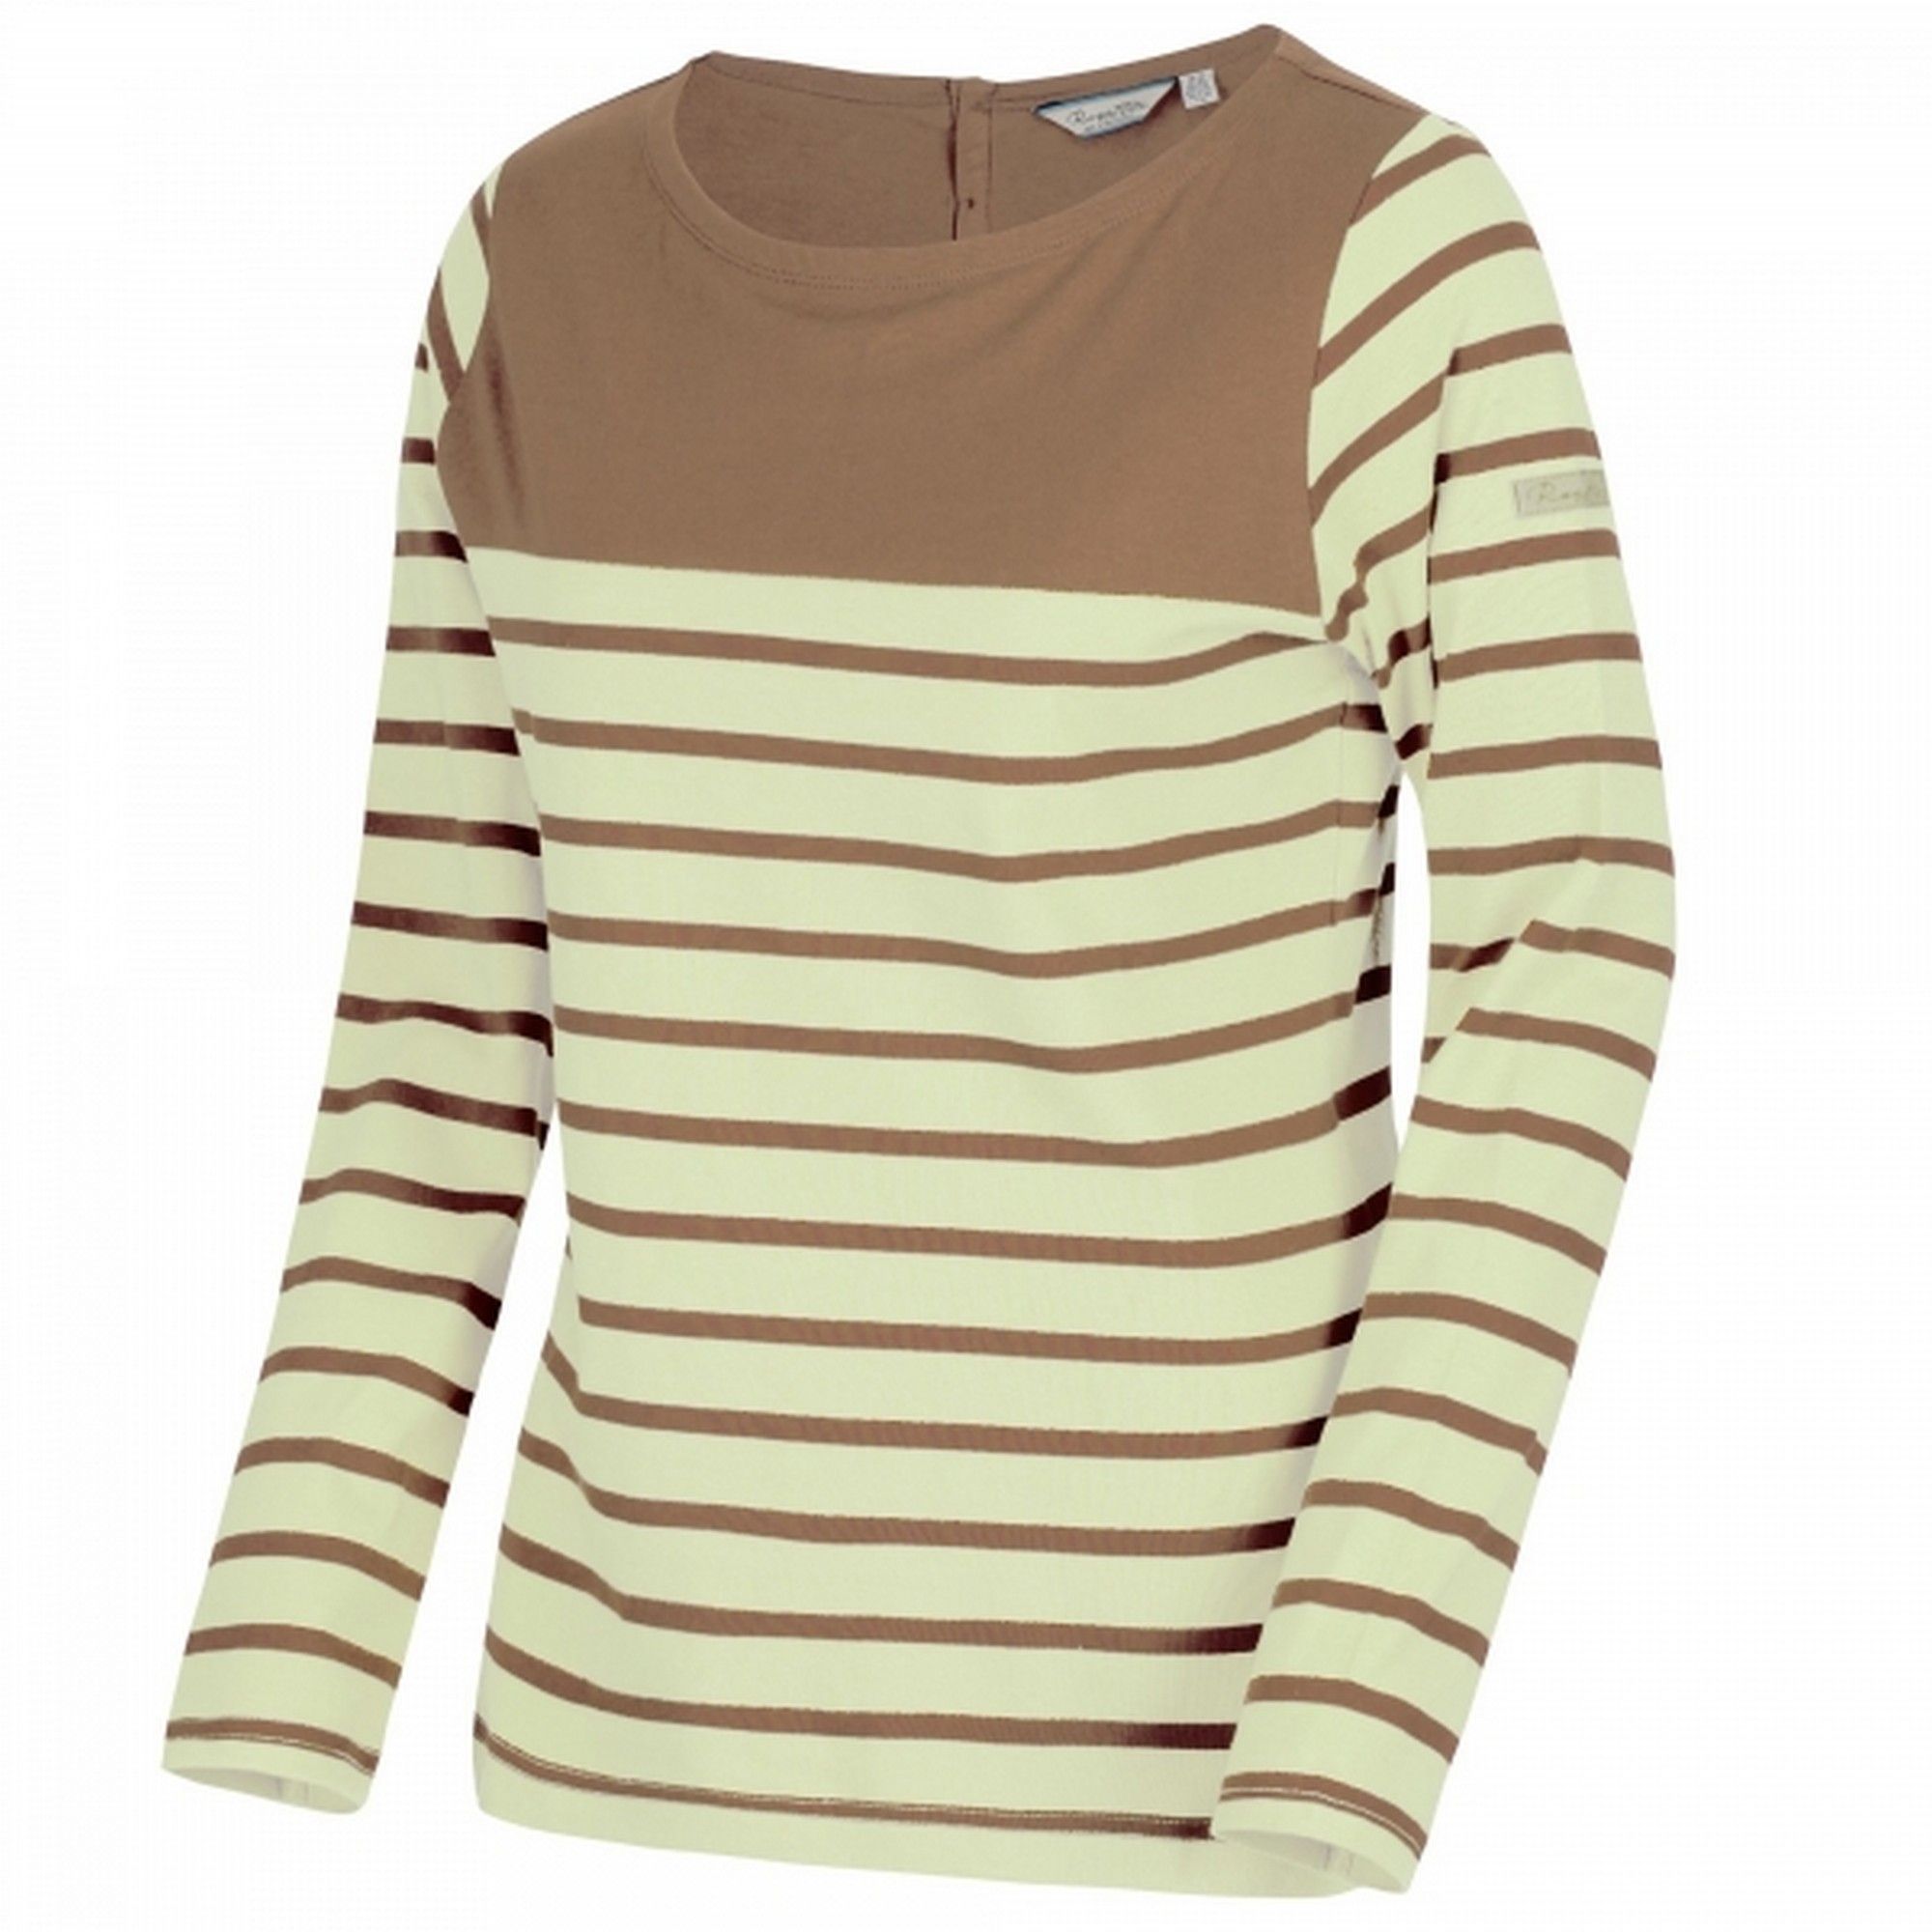 Womens long sleeved T-shirt with striped pattern. 190gsm coolweave Cotton yarn dye jersey. Comfortable and stylish. 100% Cotton.